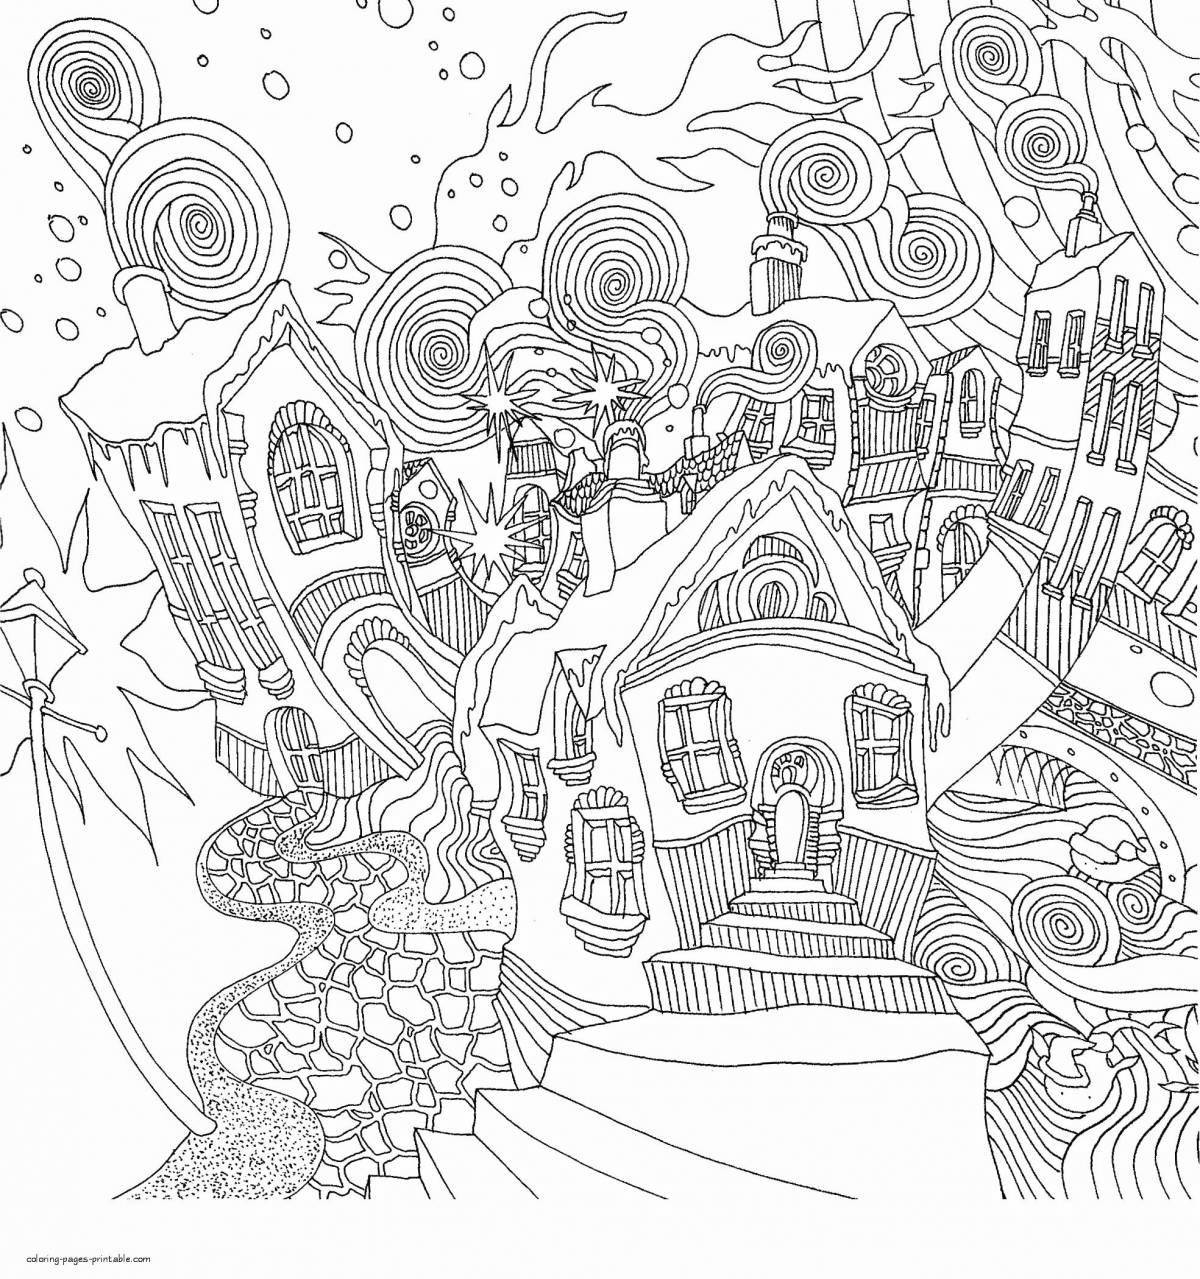 Animated city coloring book for adults